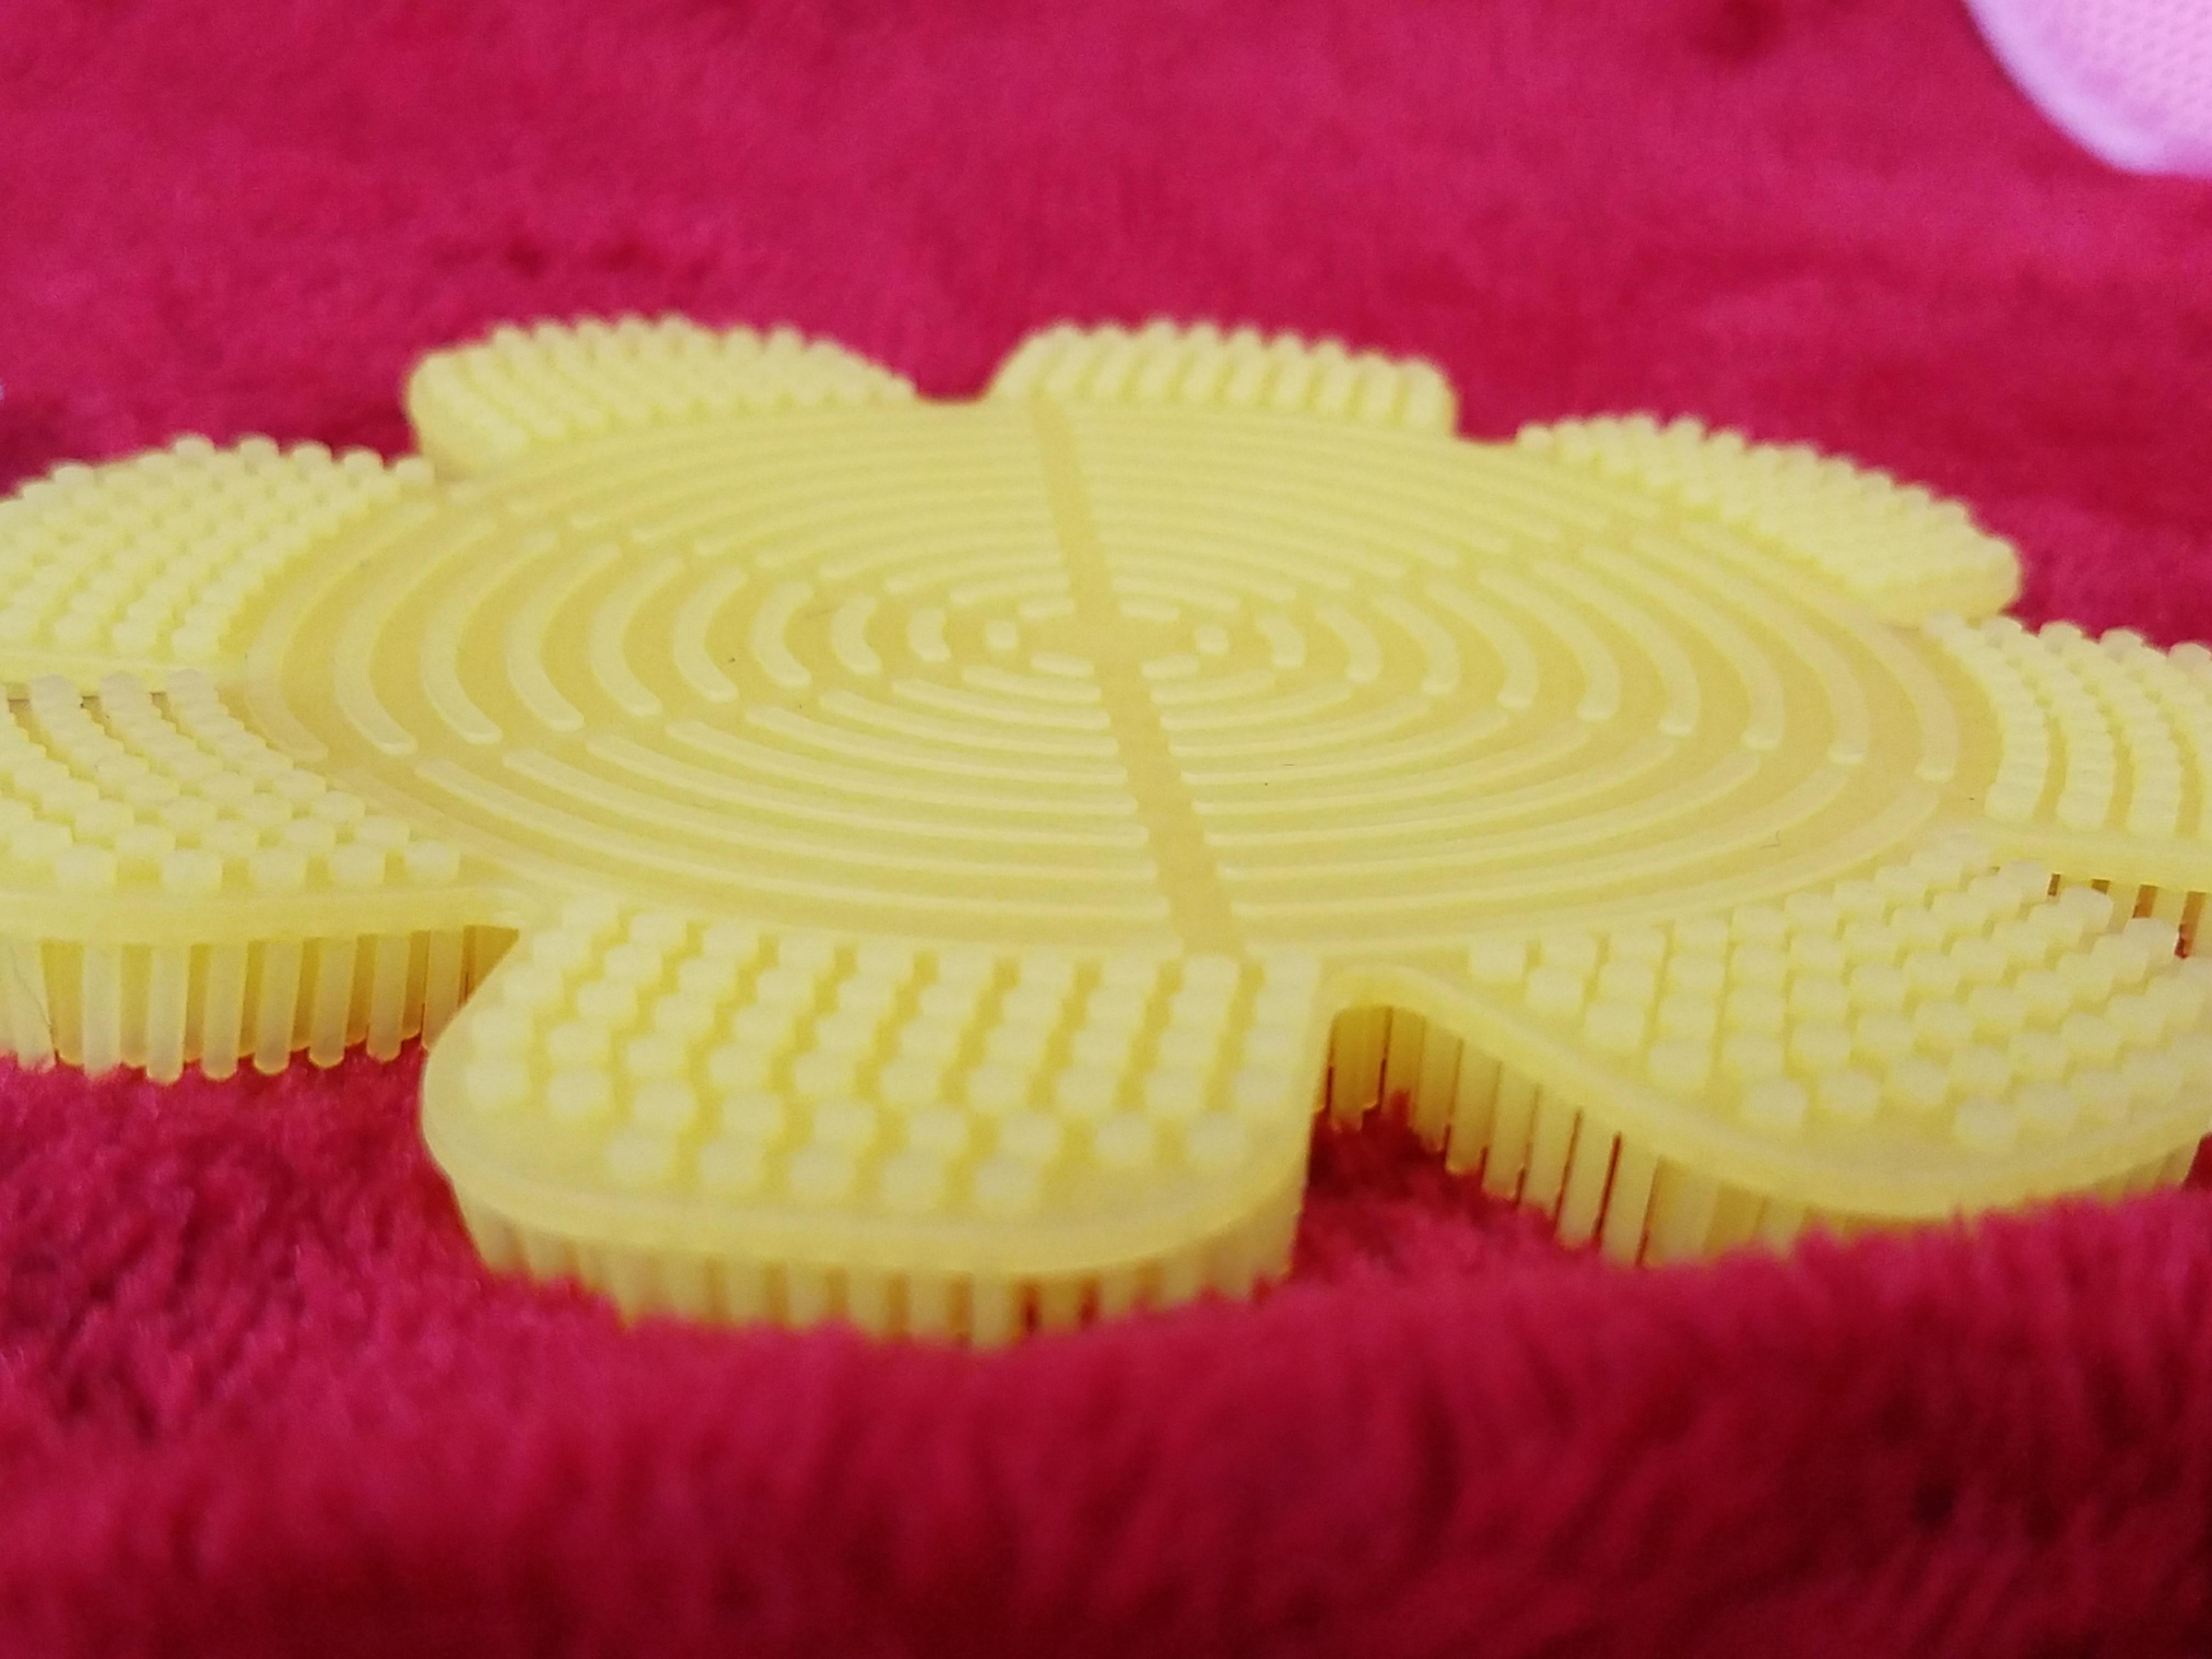 Floral fashion 2 pack silicone sponges are premium quality, multi-purpose, can open lids, handle hot pans, & are antibacterial & more hygienic than a traditional sponge.